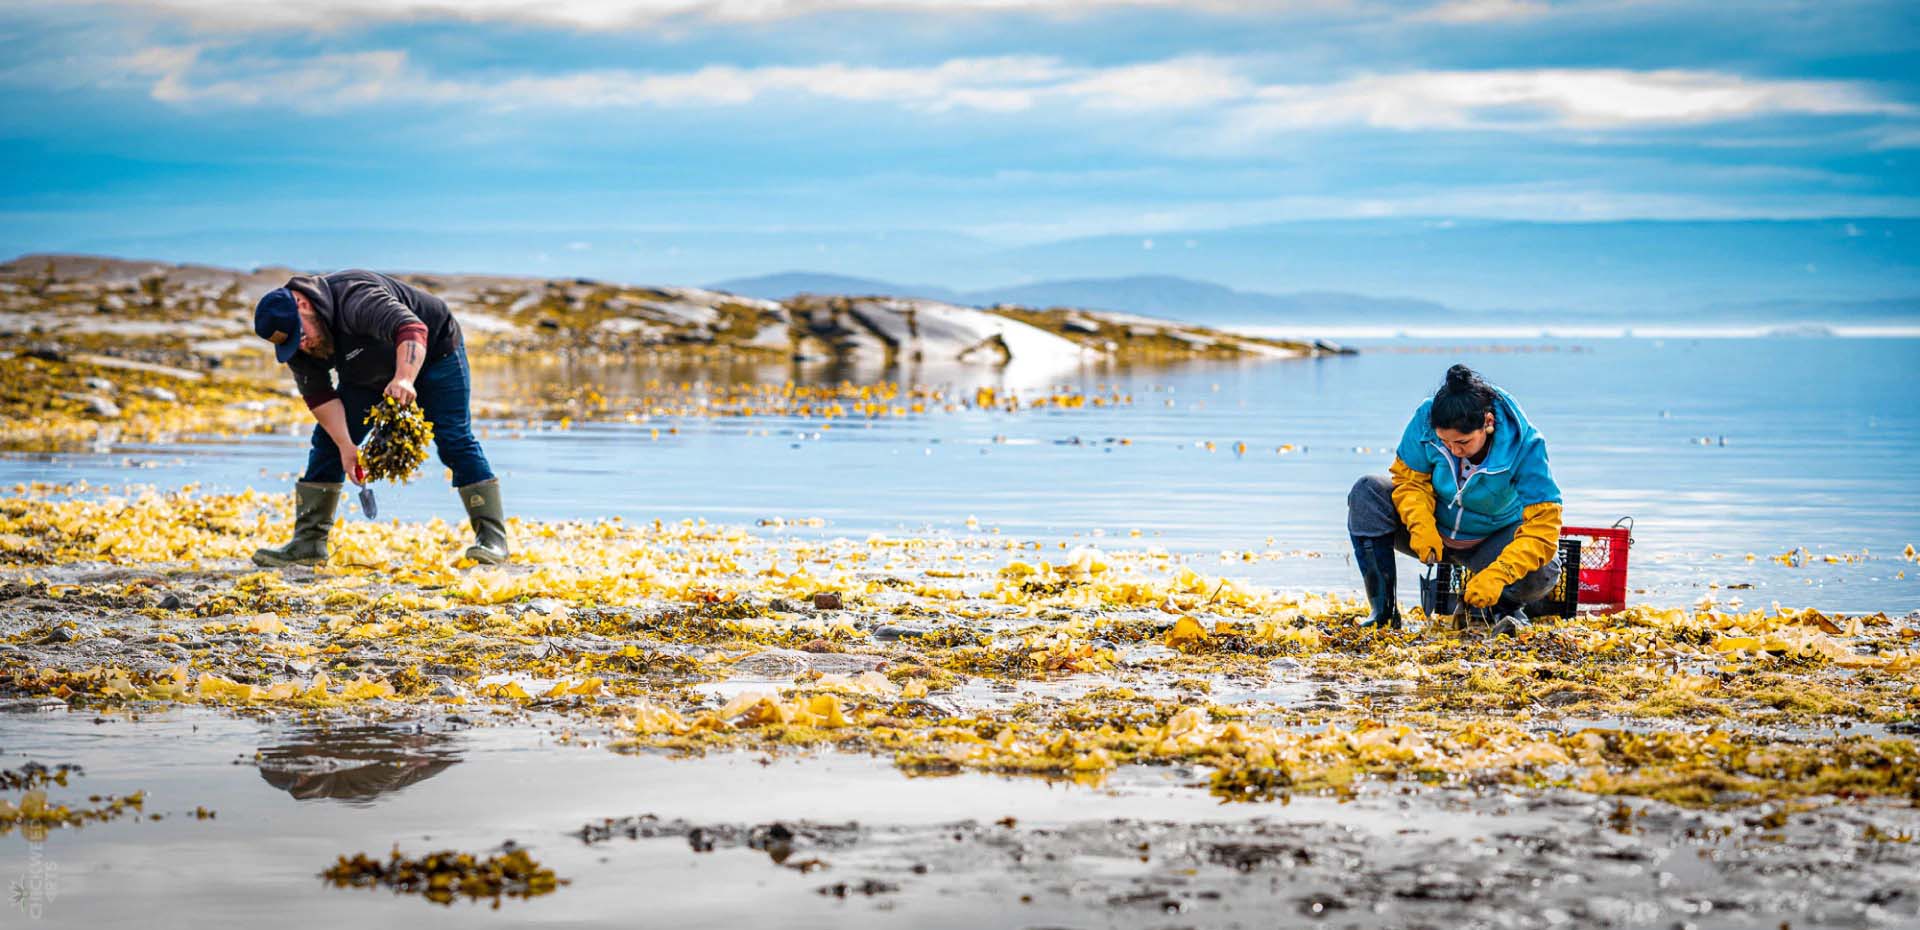 Justin and Bernice of Uasau Soap gathering seaweed on the shore, with mountains in the background